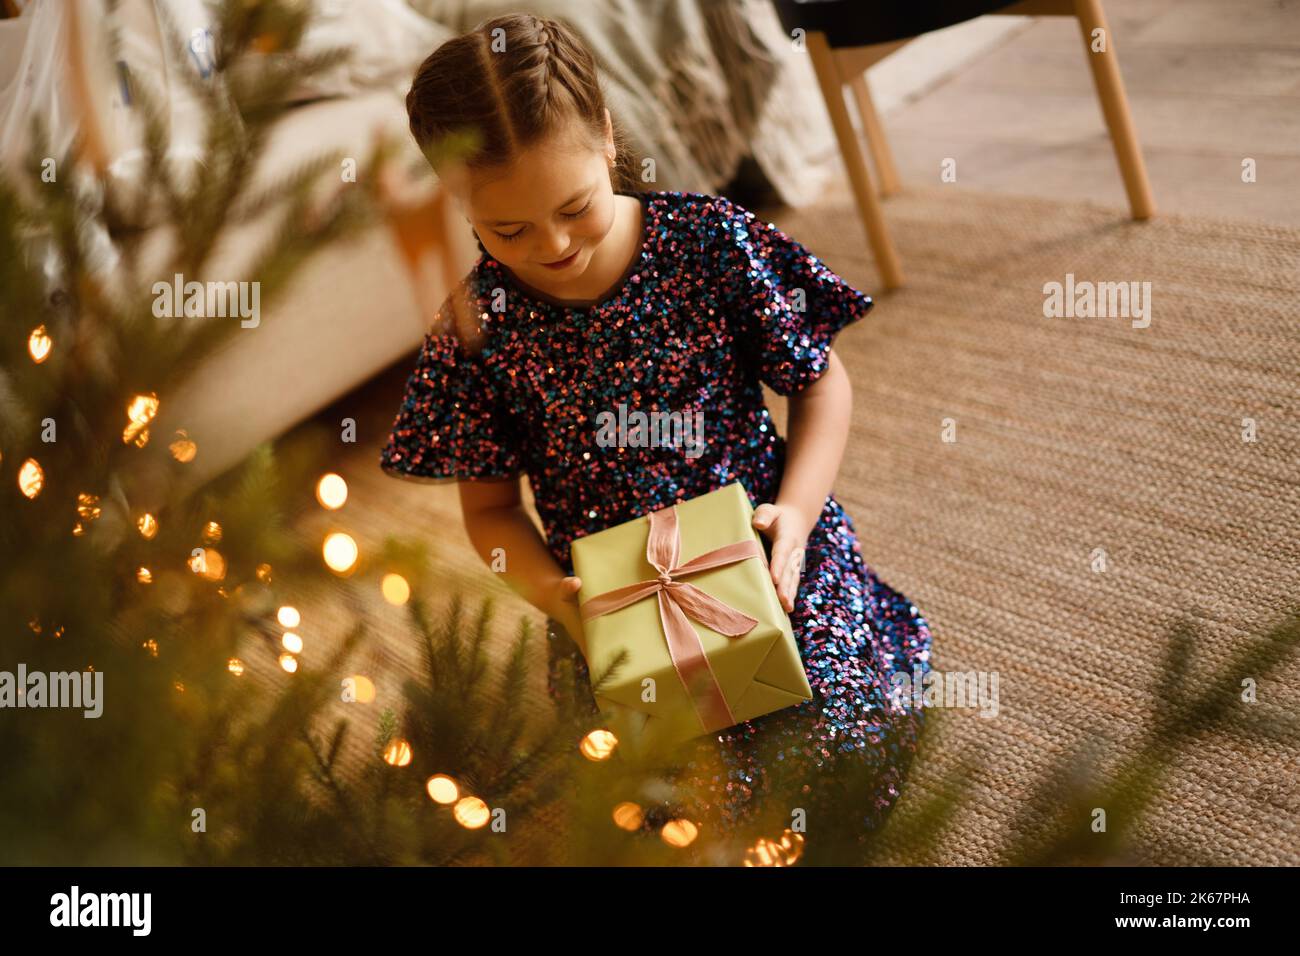 Happy holidays. Little child opening present near Christmas tree. The girl laughing and enjoying the gift Stock Photo